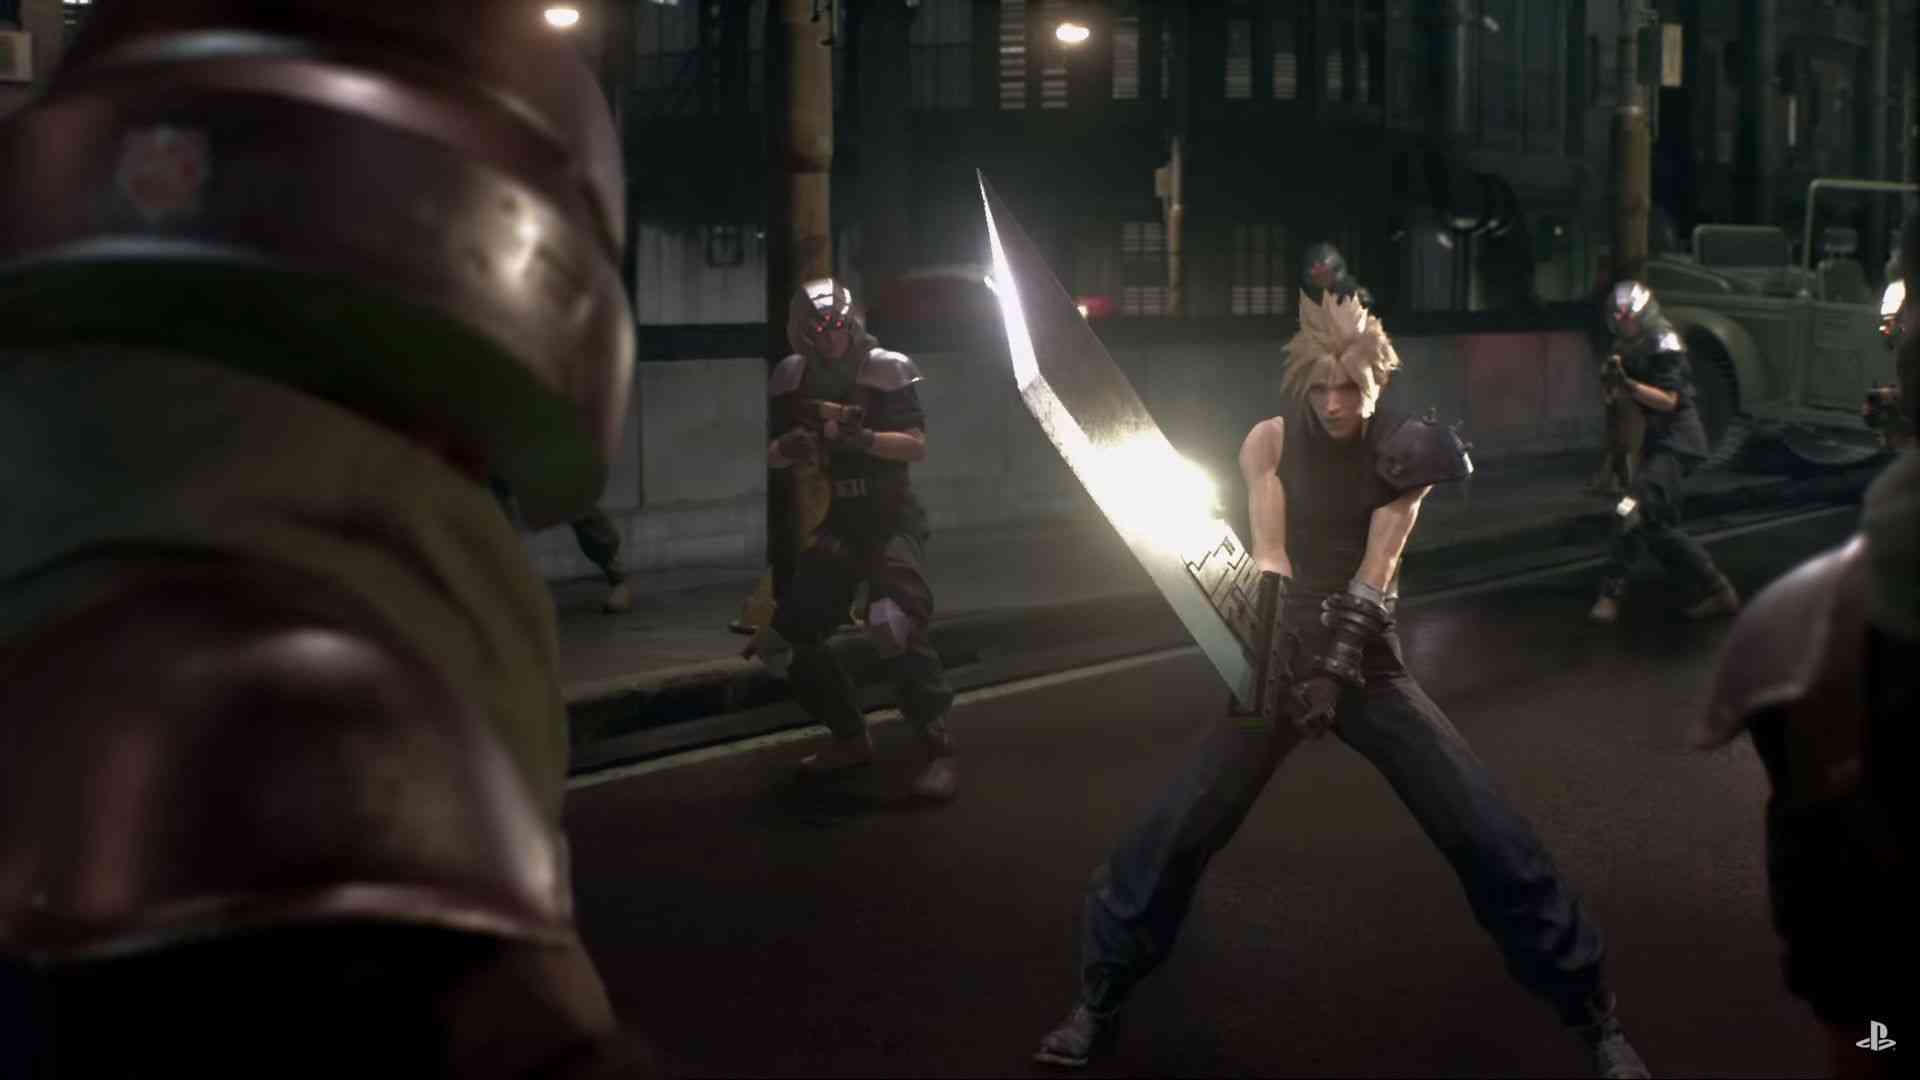 final fantasy vii remake demo datamine reveals weapons and abilities 3639 big 1